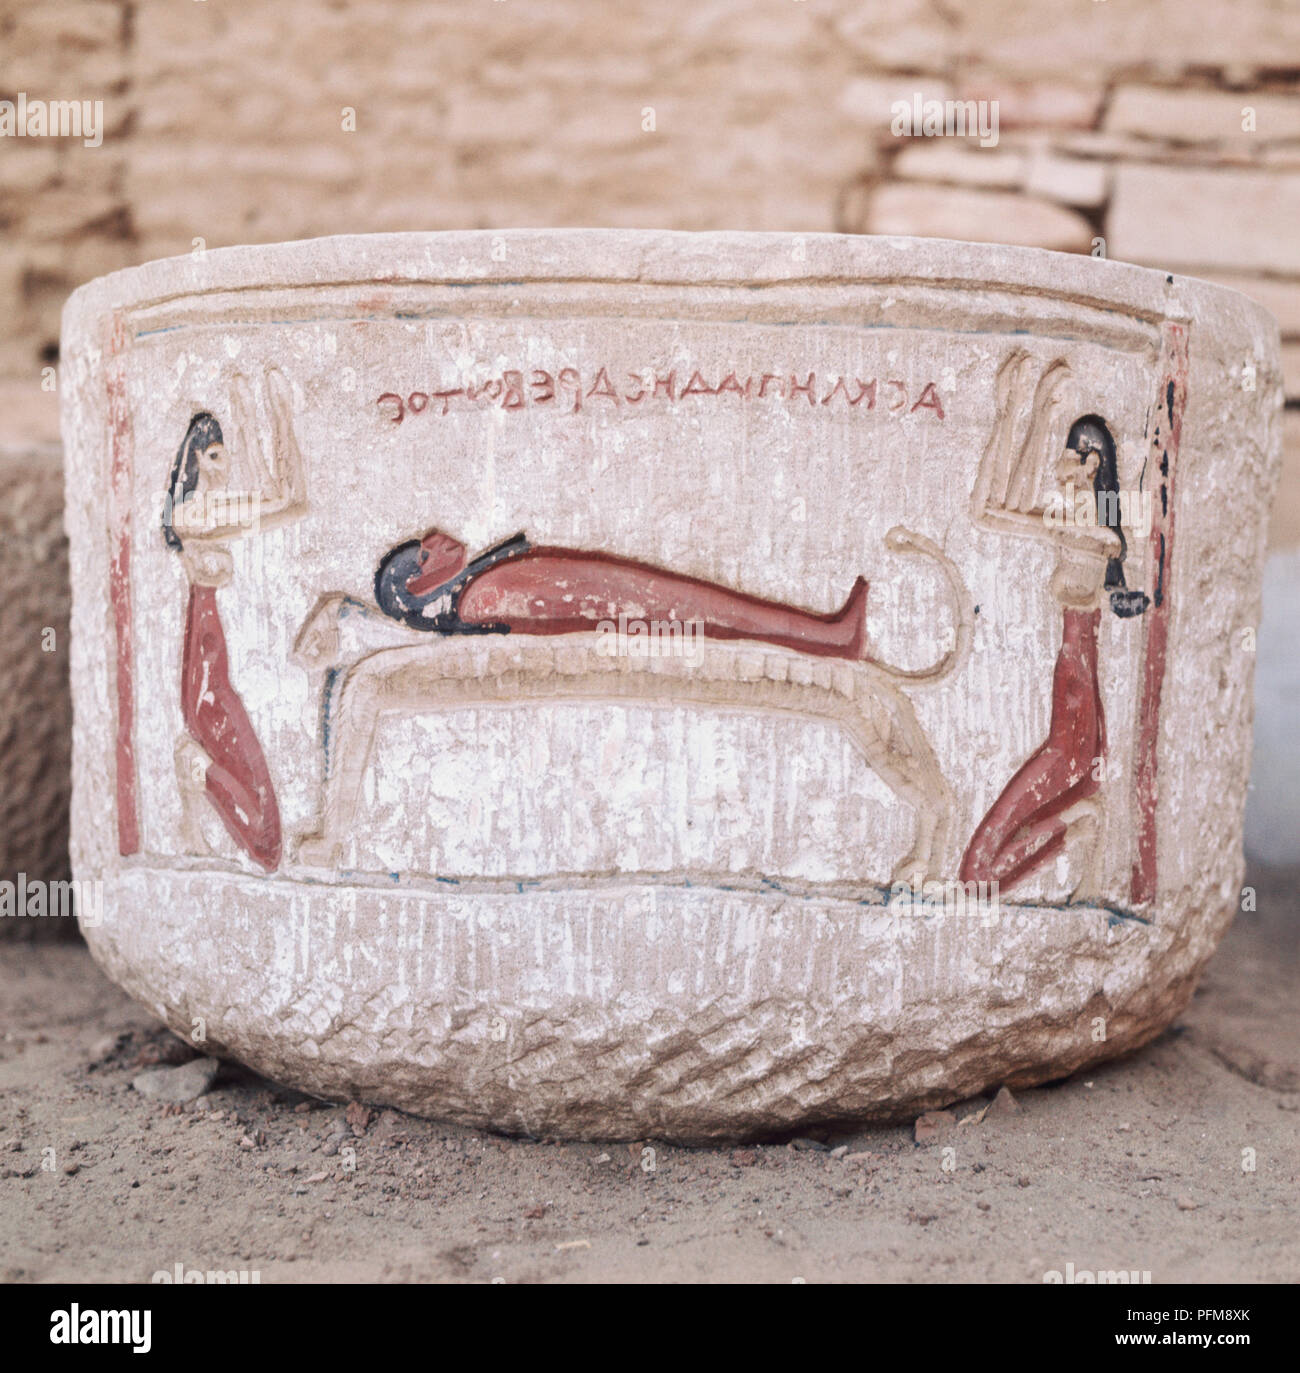 Egypt, Komombo, Sarcophagus at the Temple of Haroeris depicting Isis and Nephys Lamenting, carved and painted on stone. Stock Photo